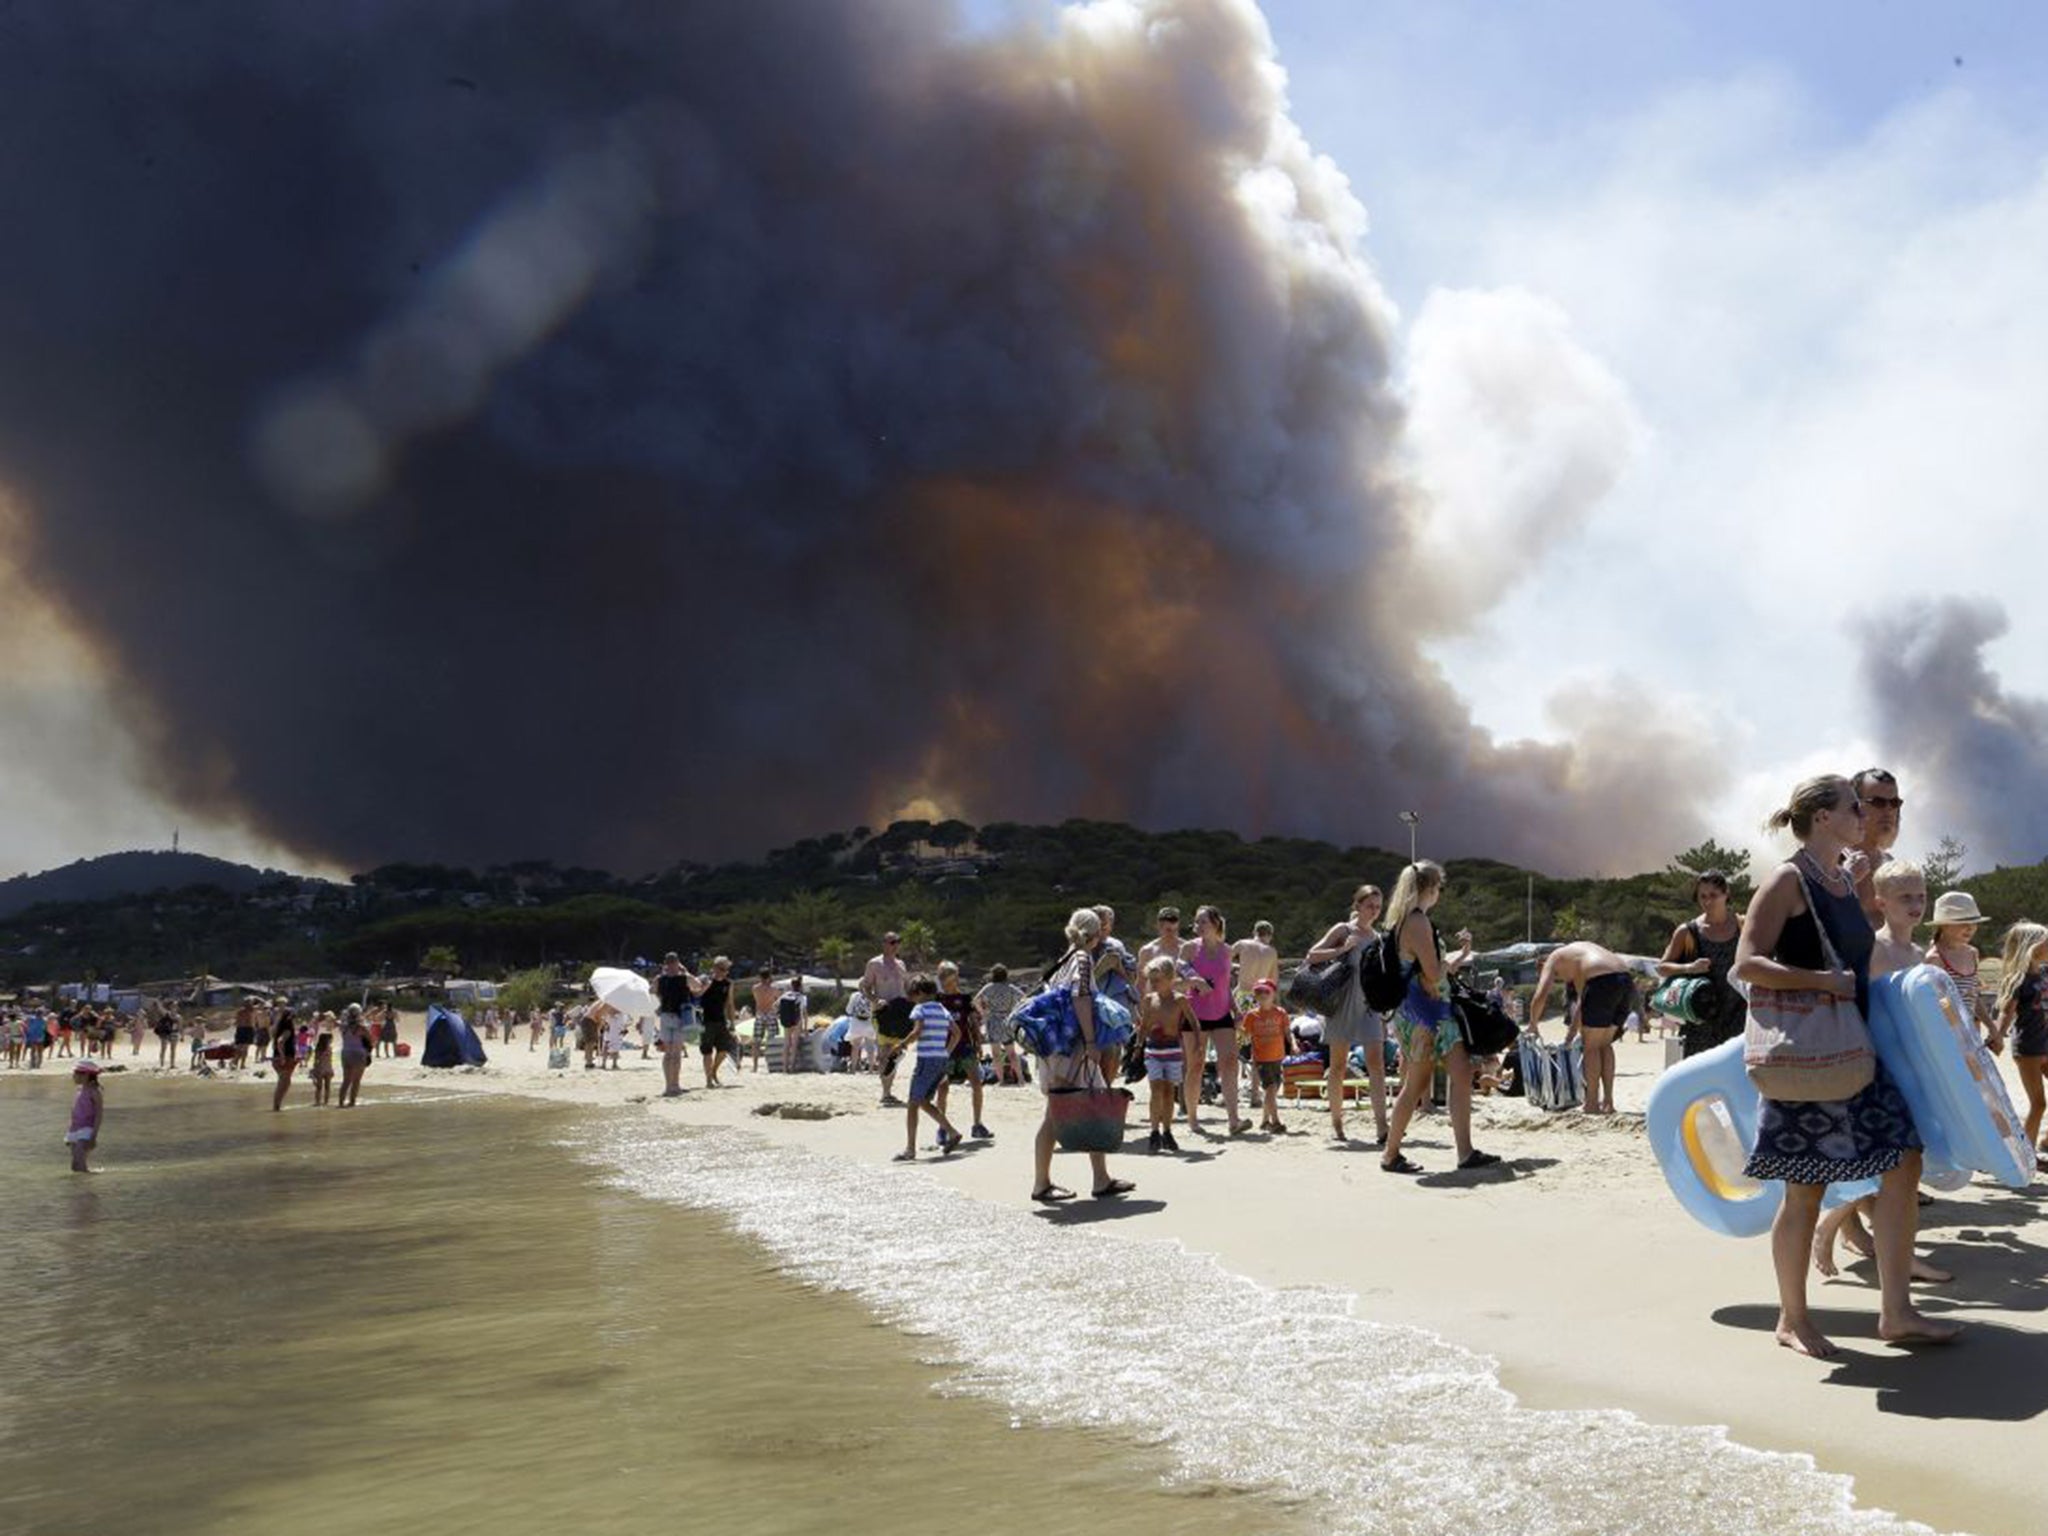 Tourists were evacuated to a beach as the fires threatened the Mediterranean coast